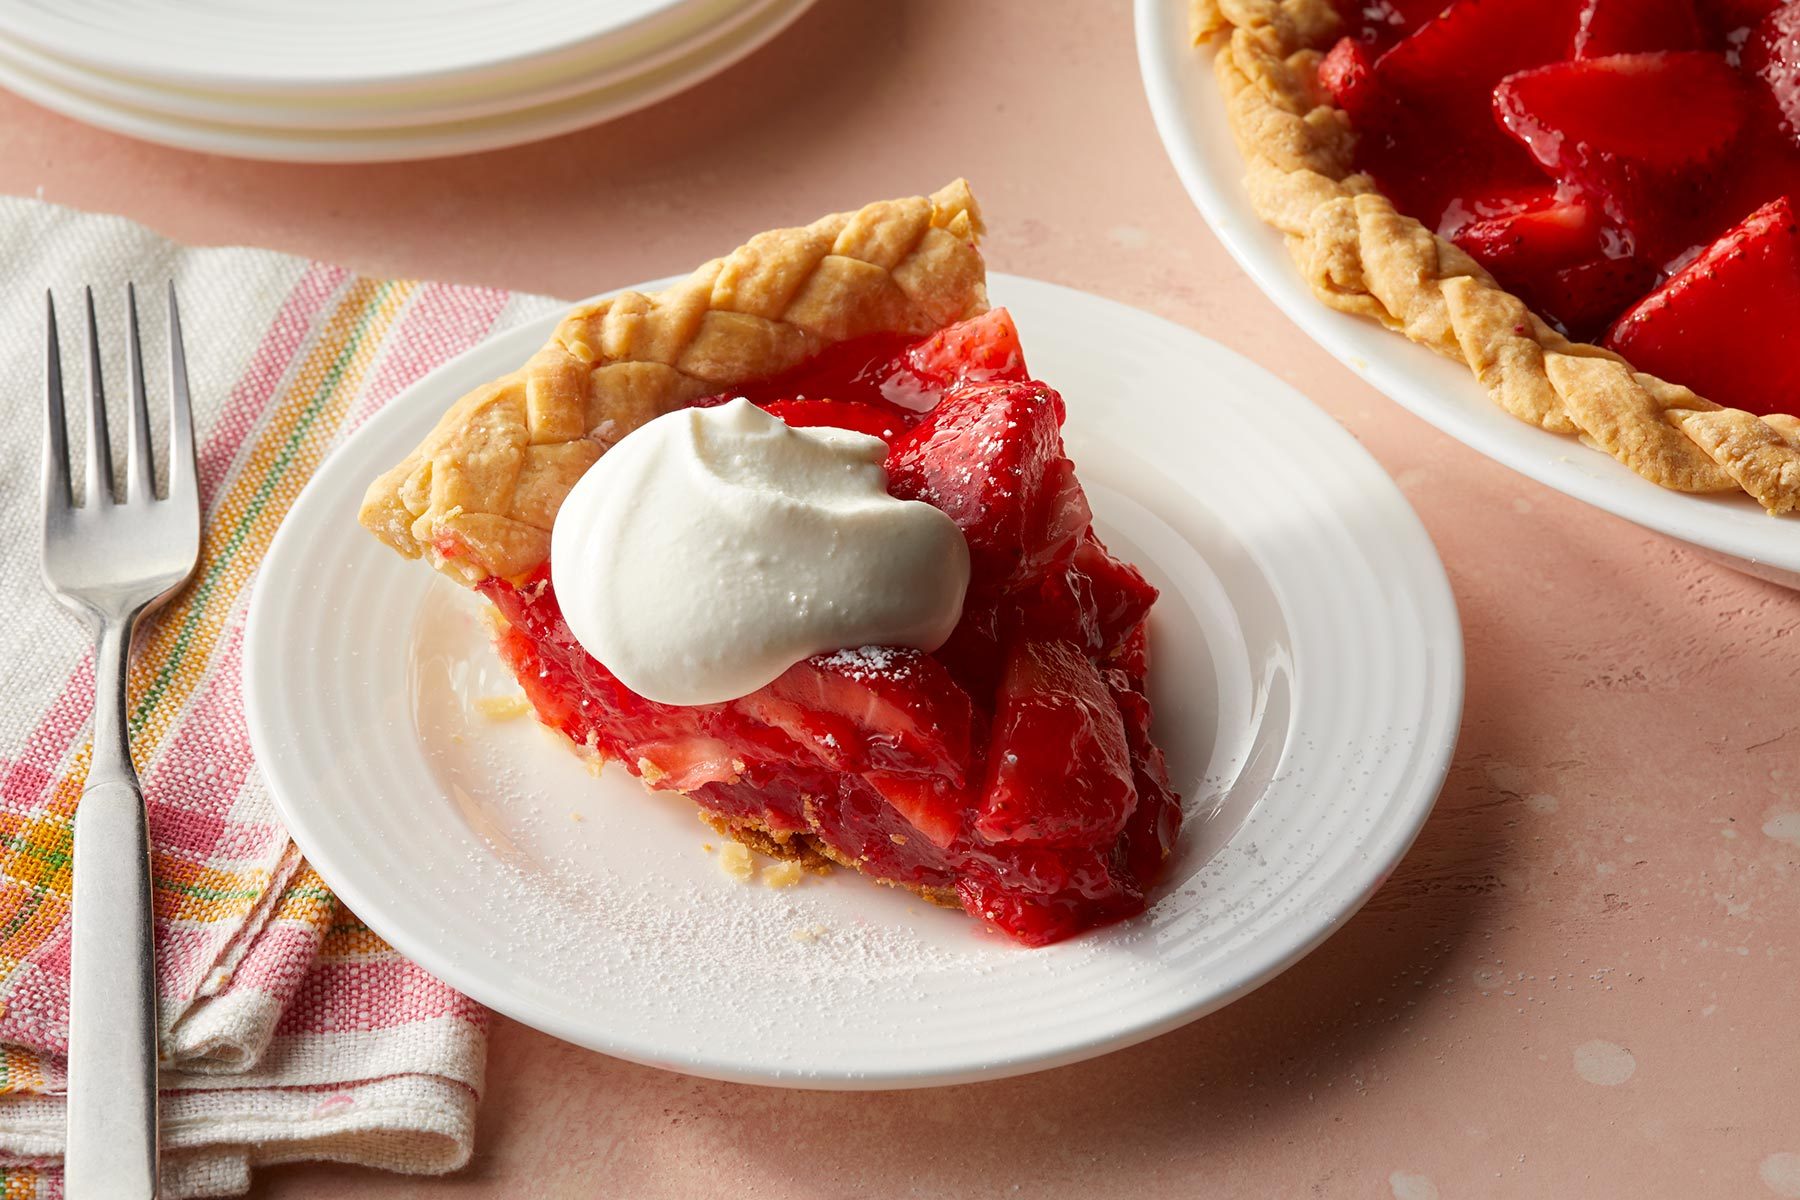 Strawberry Pie served with ice cream on a plate